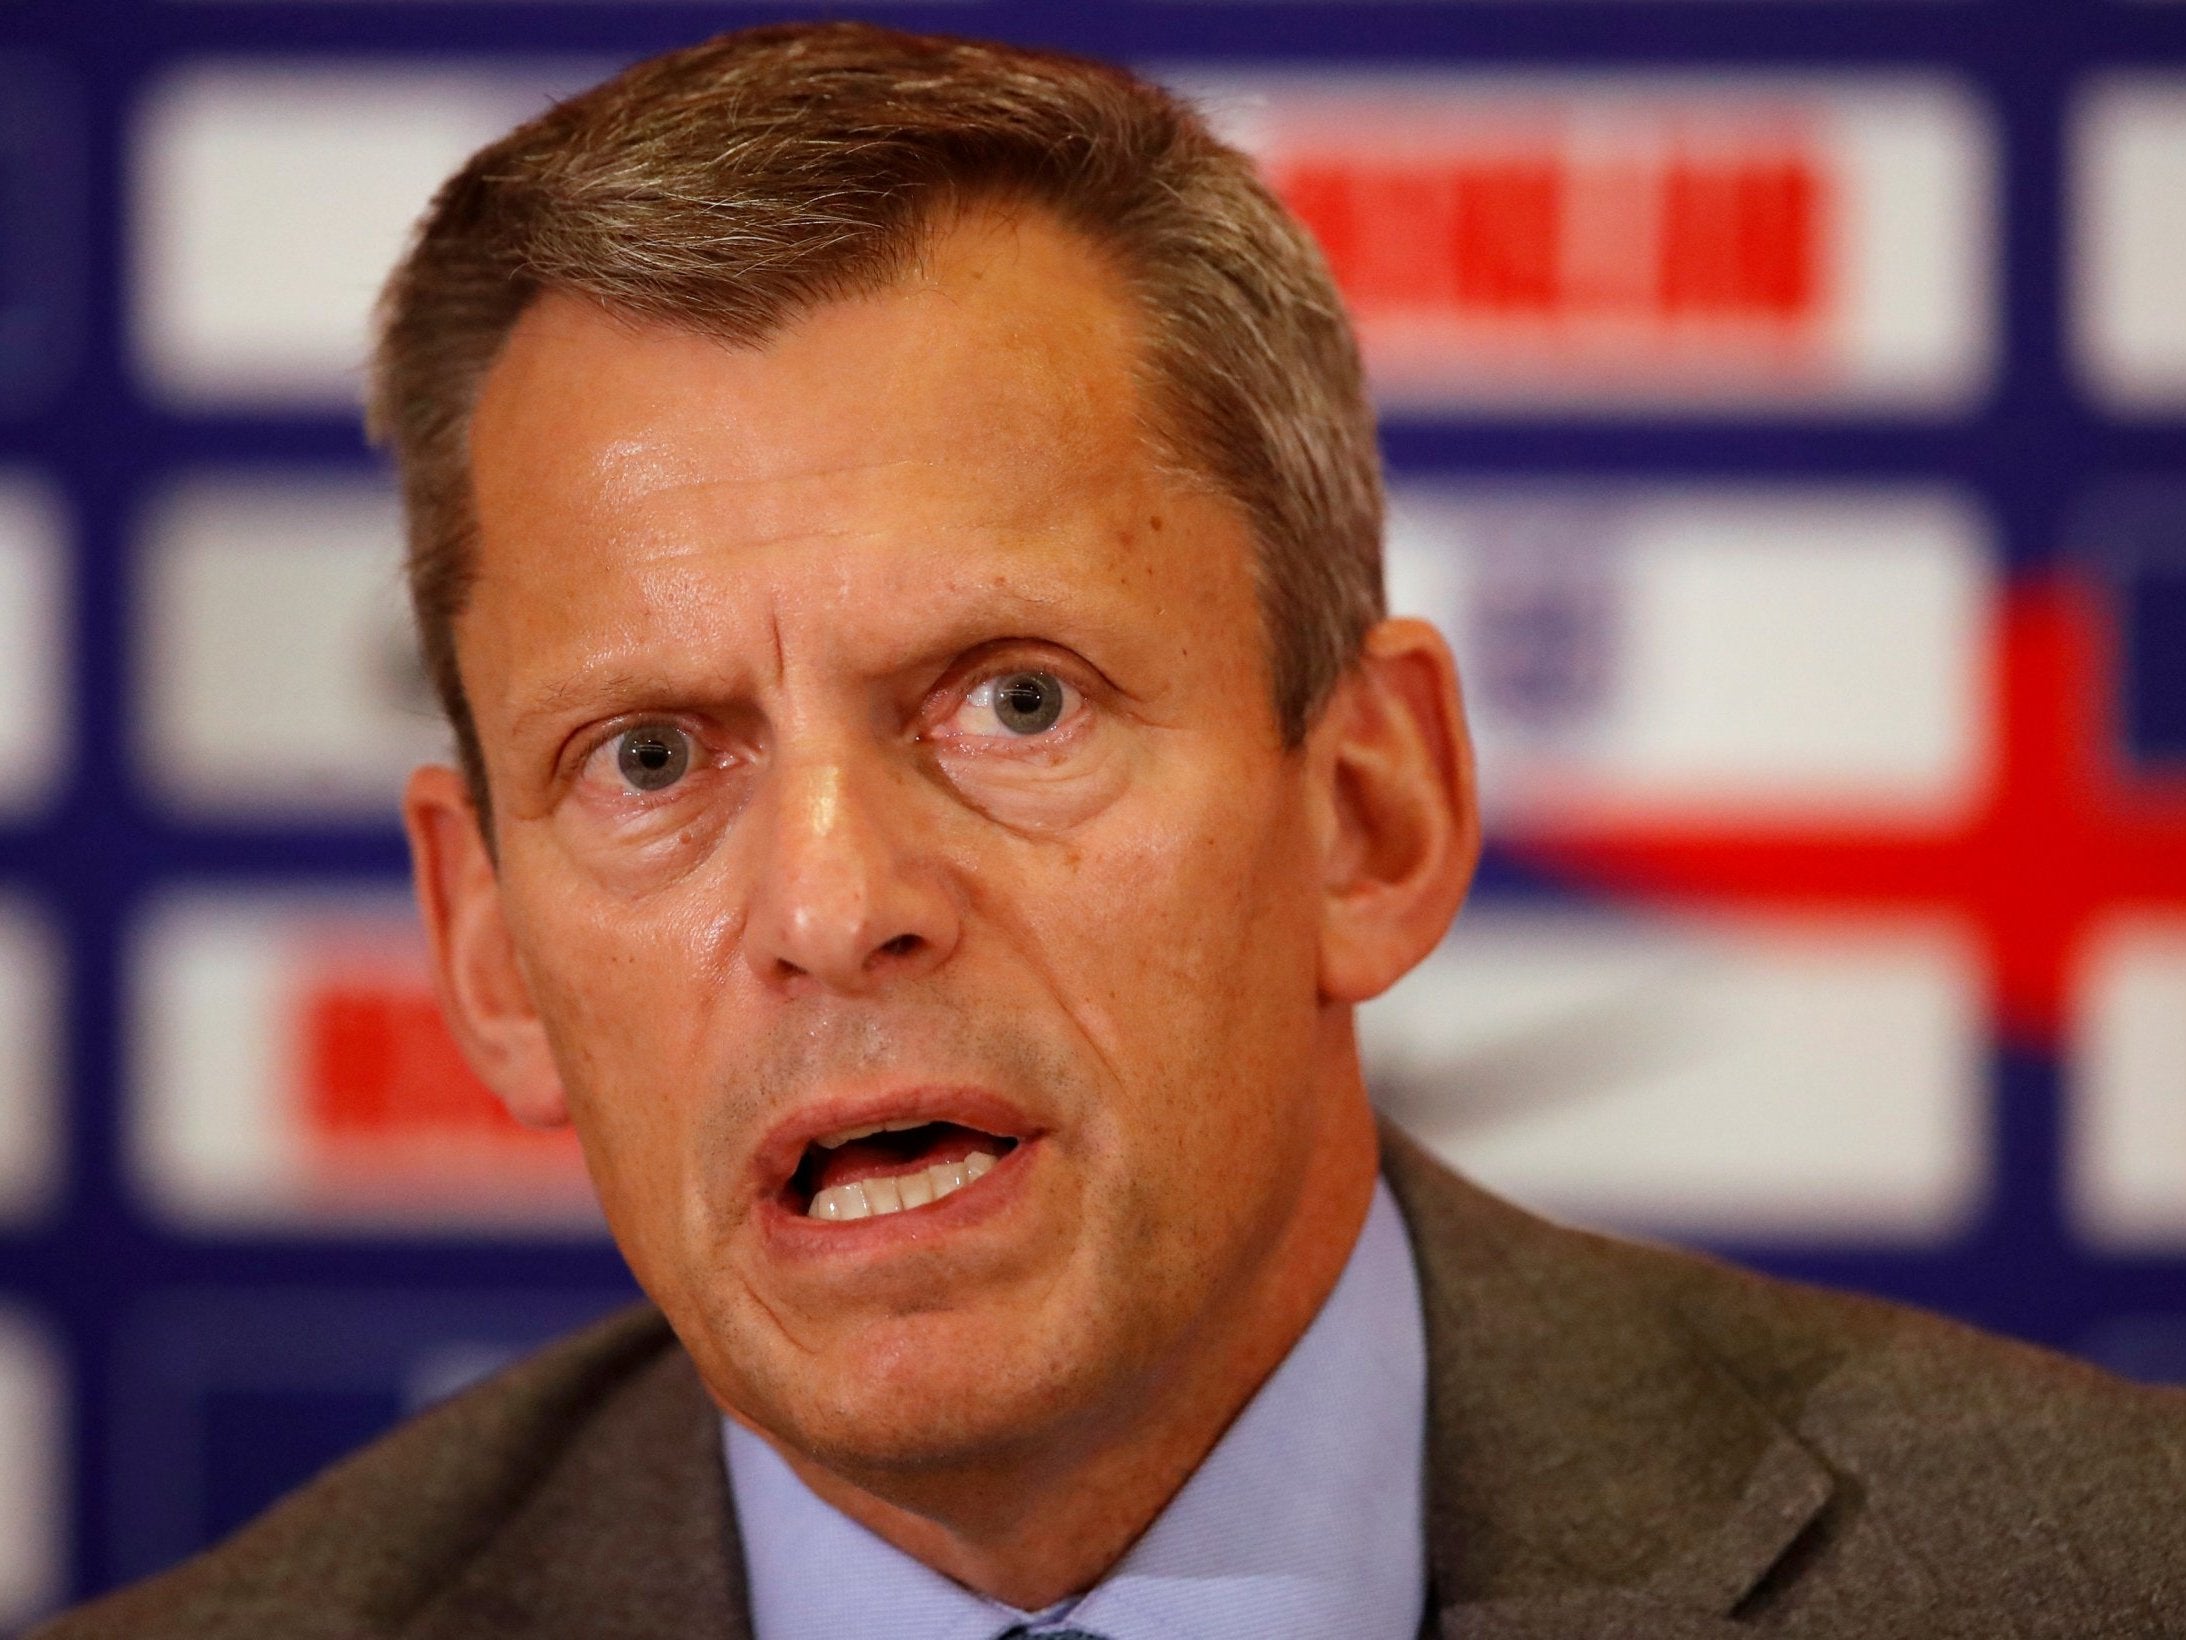 Martin Glenn will leave the FA after a period of success combined with failures off the pitch